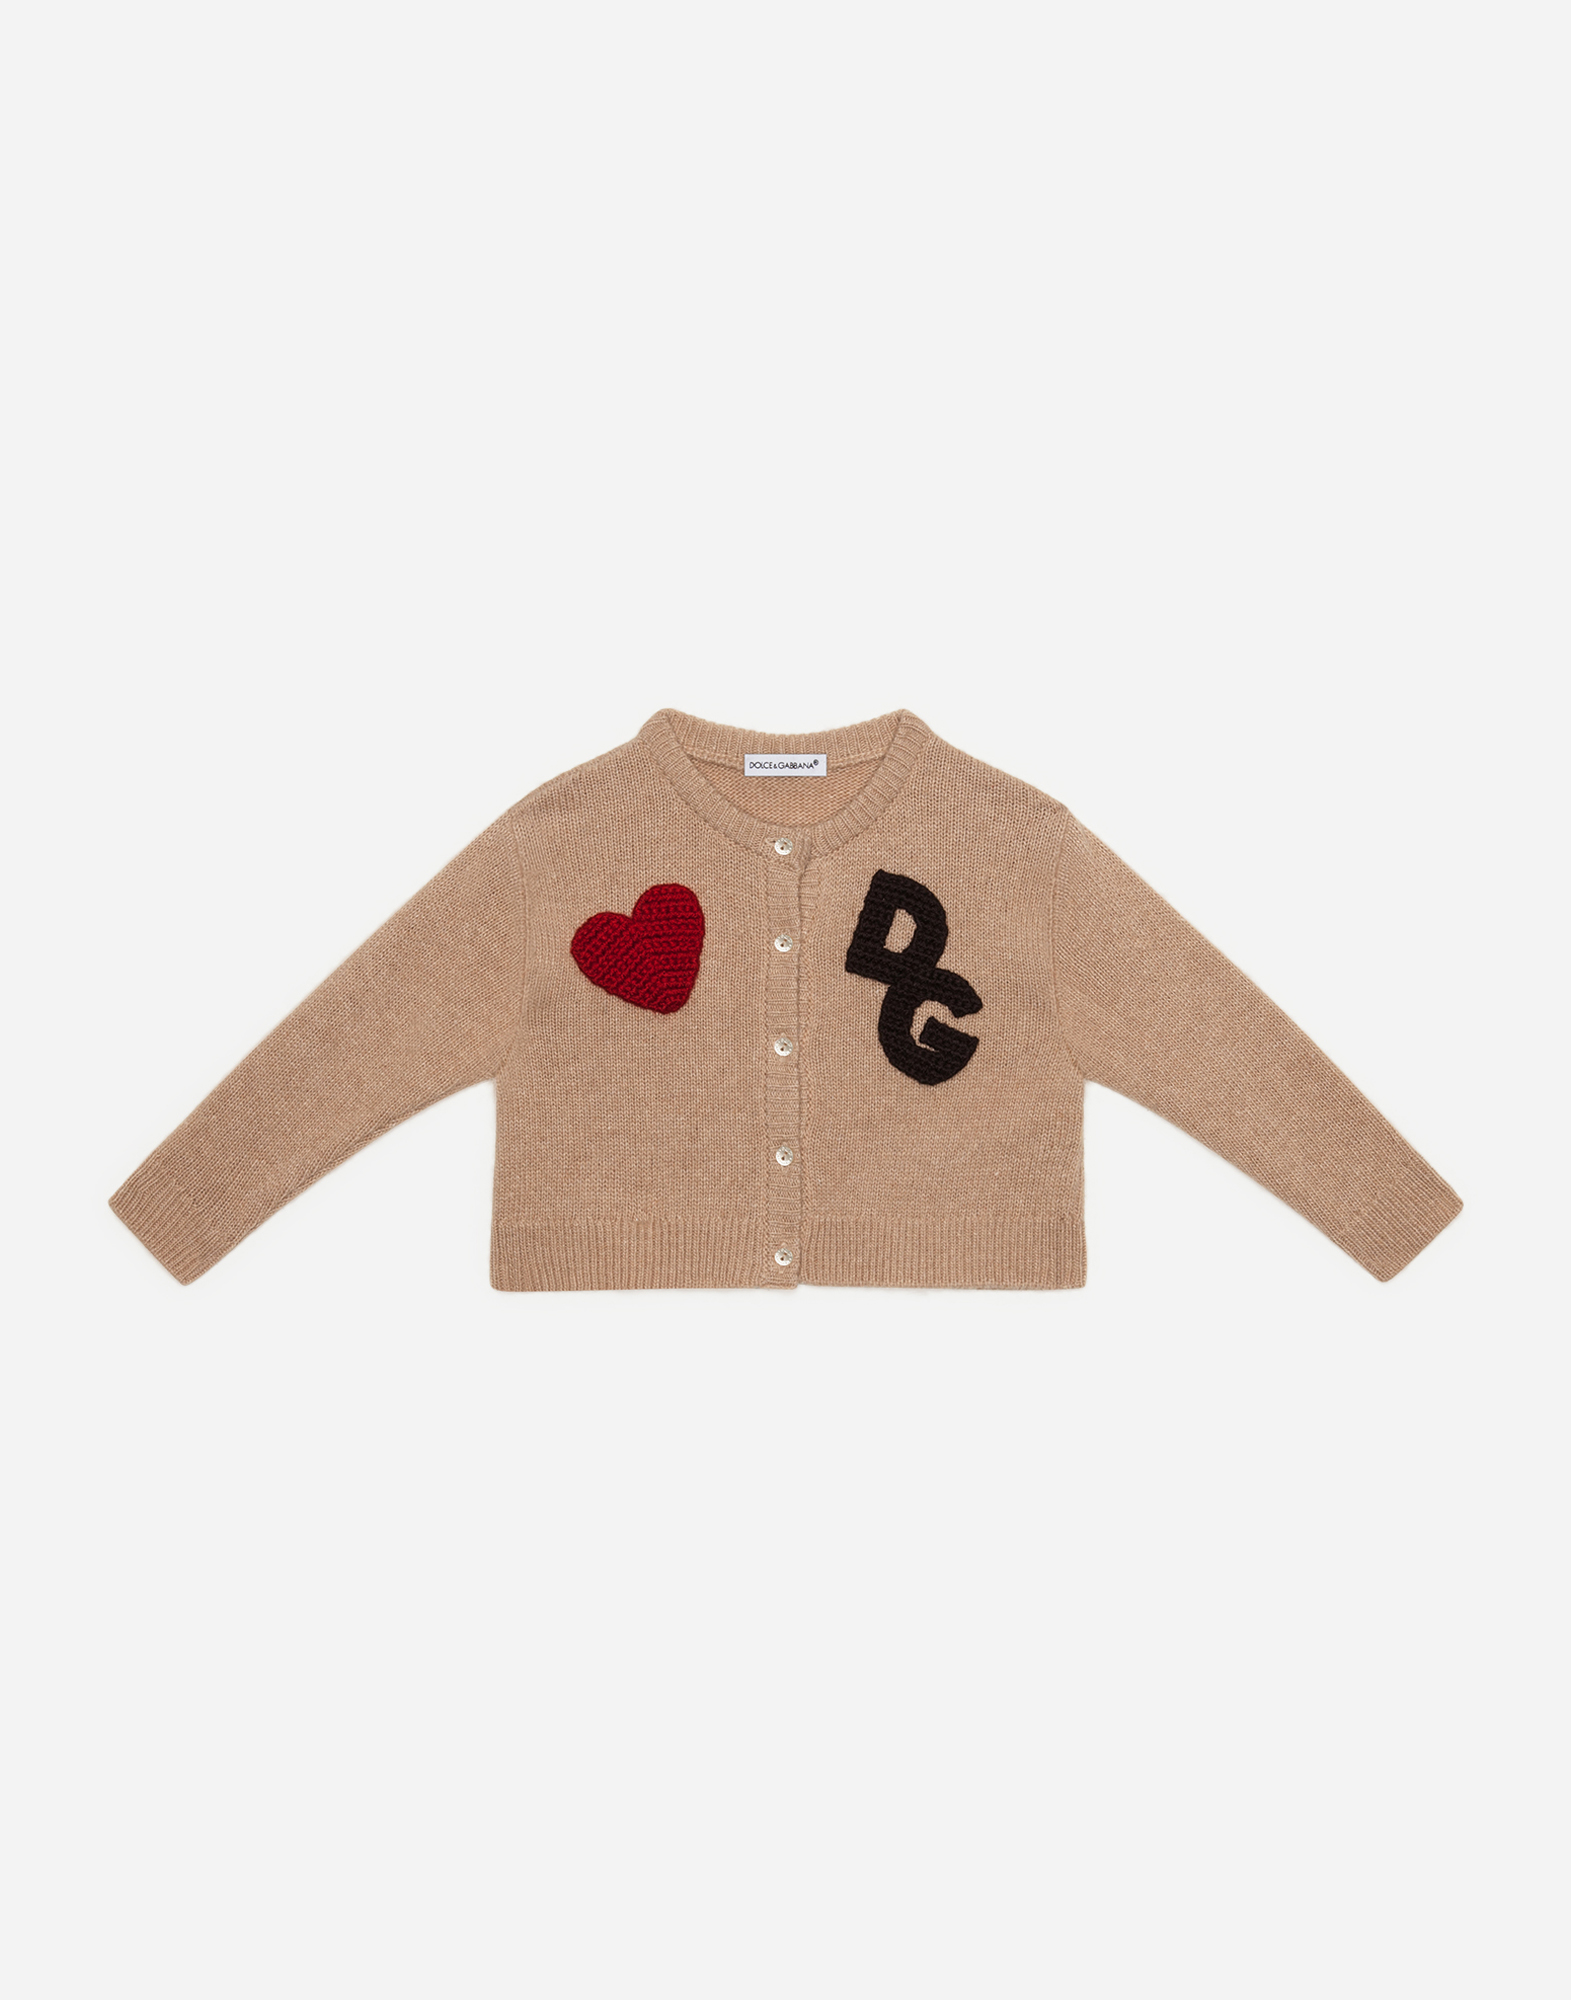 DOLCE & GABBANA Wool cardigan with DG patch embellishment